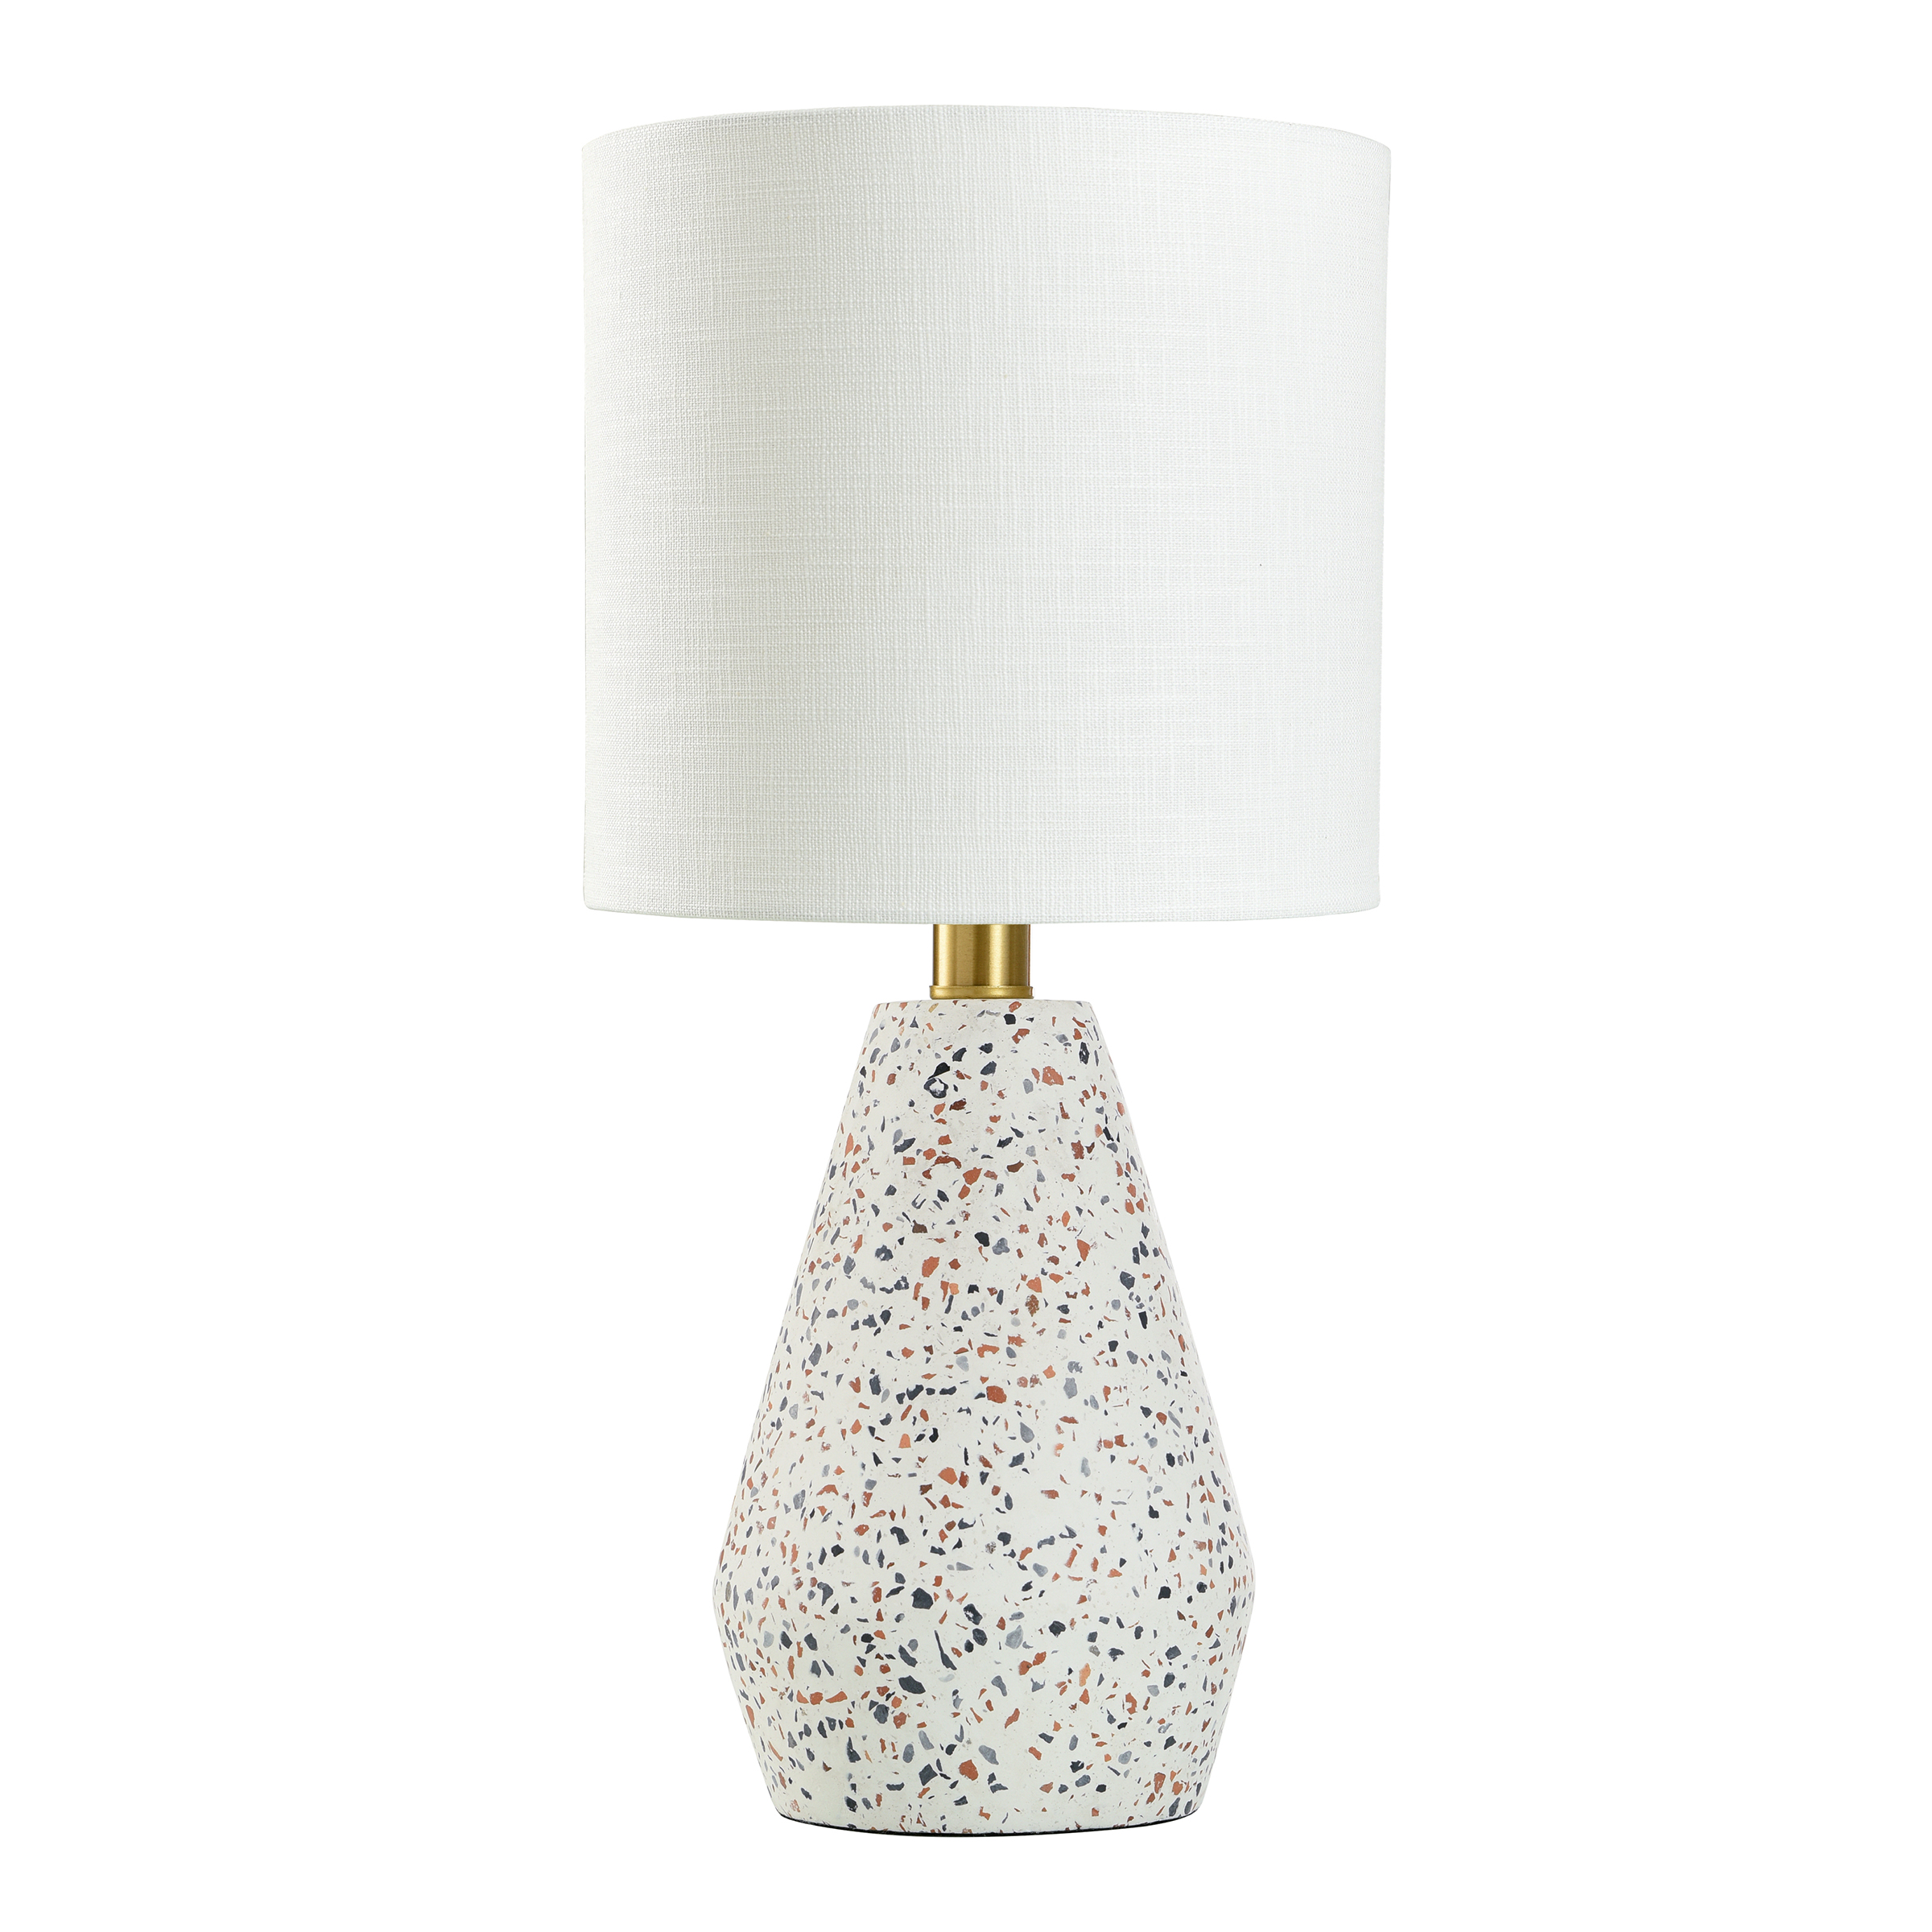 Mainstays Terrazzo Table Lamp with White Drum Shade, 8"W x 16.75"H - image 1 of 15